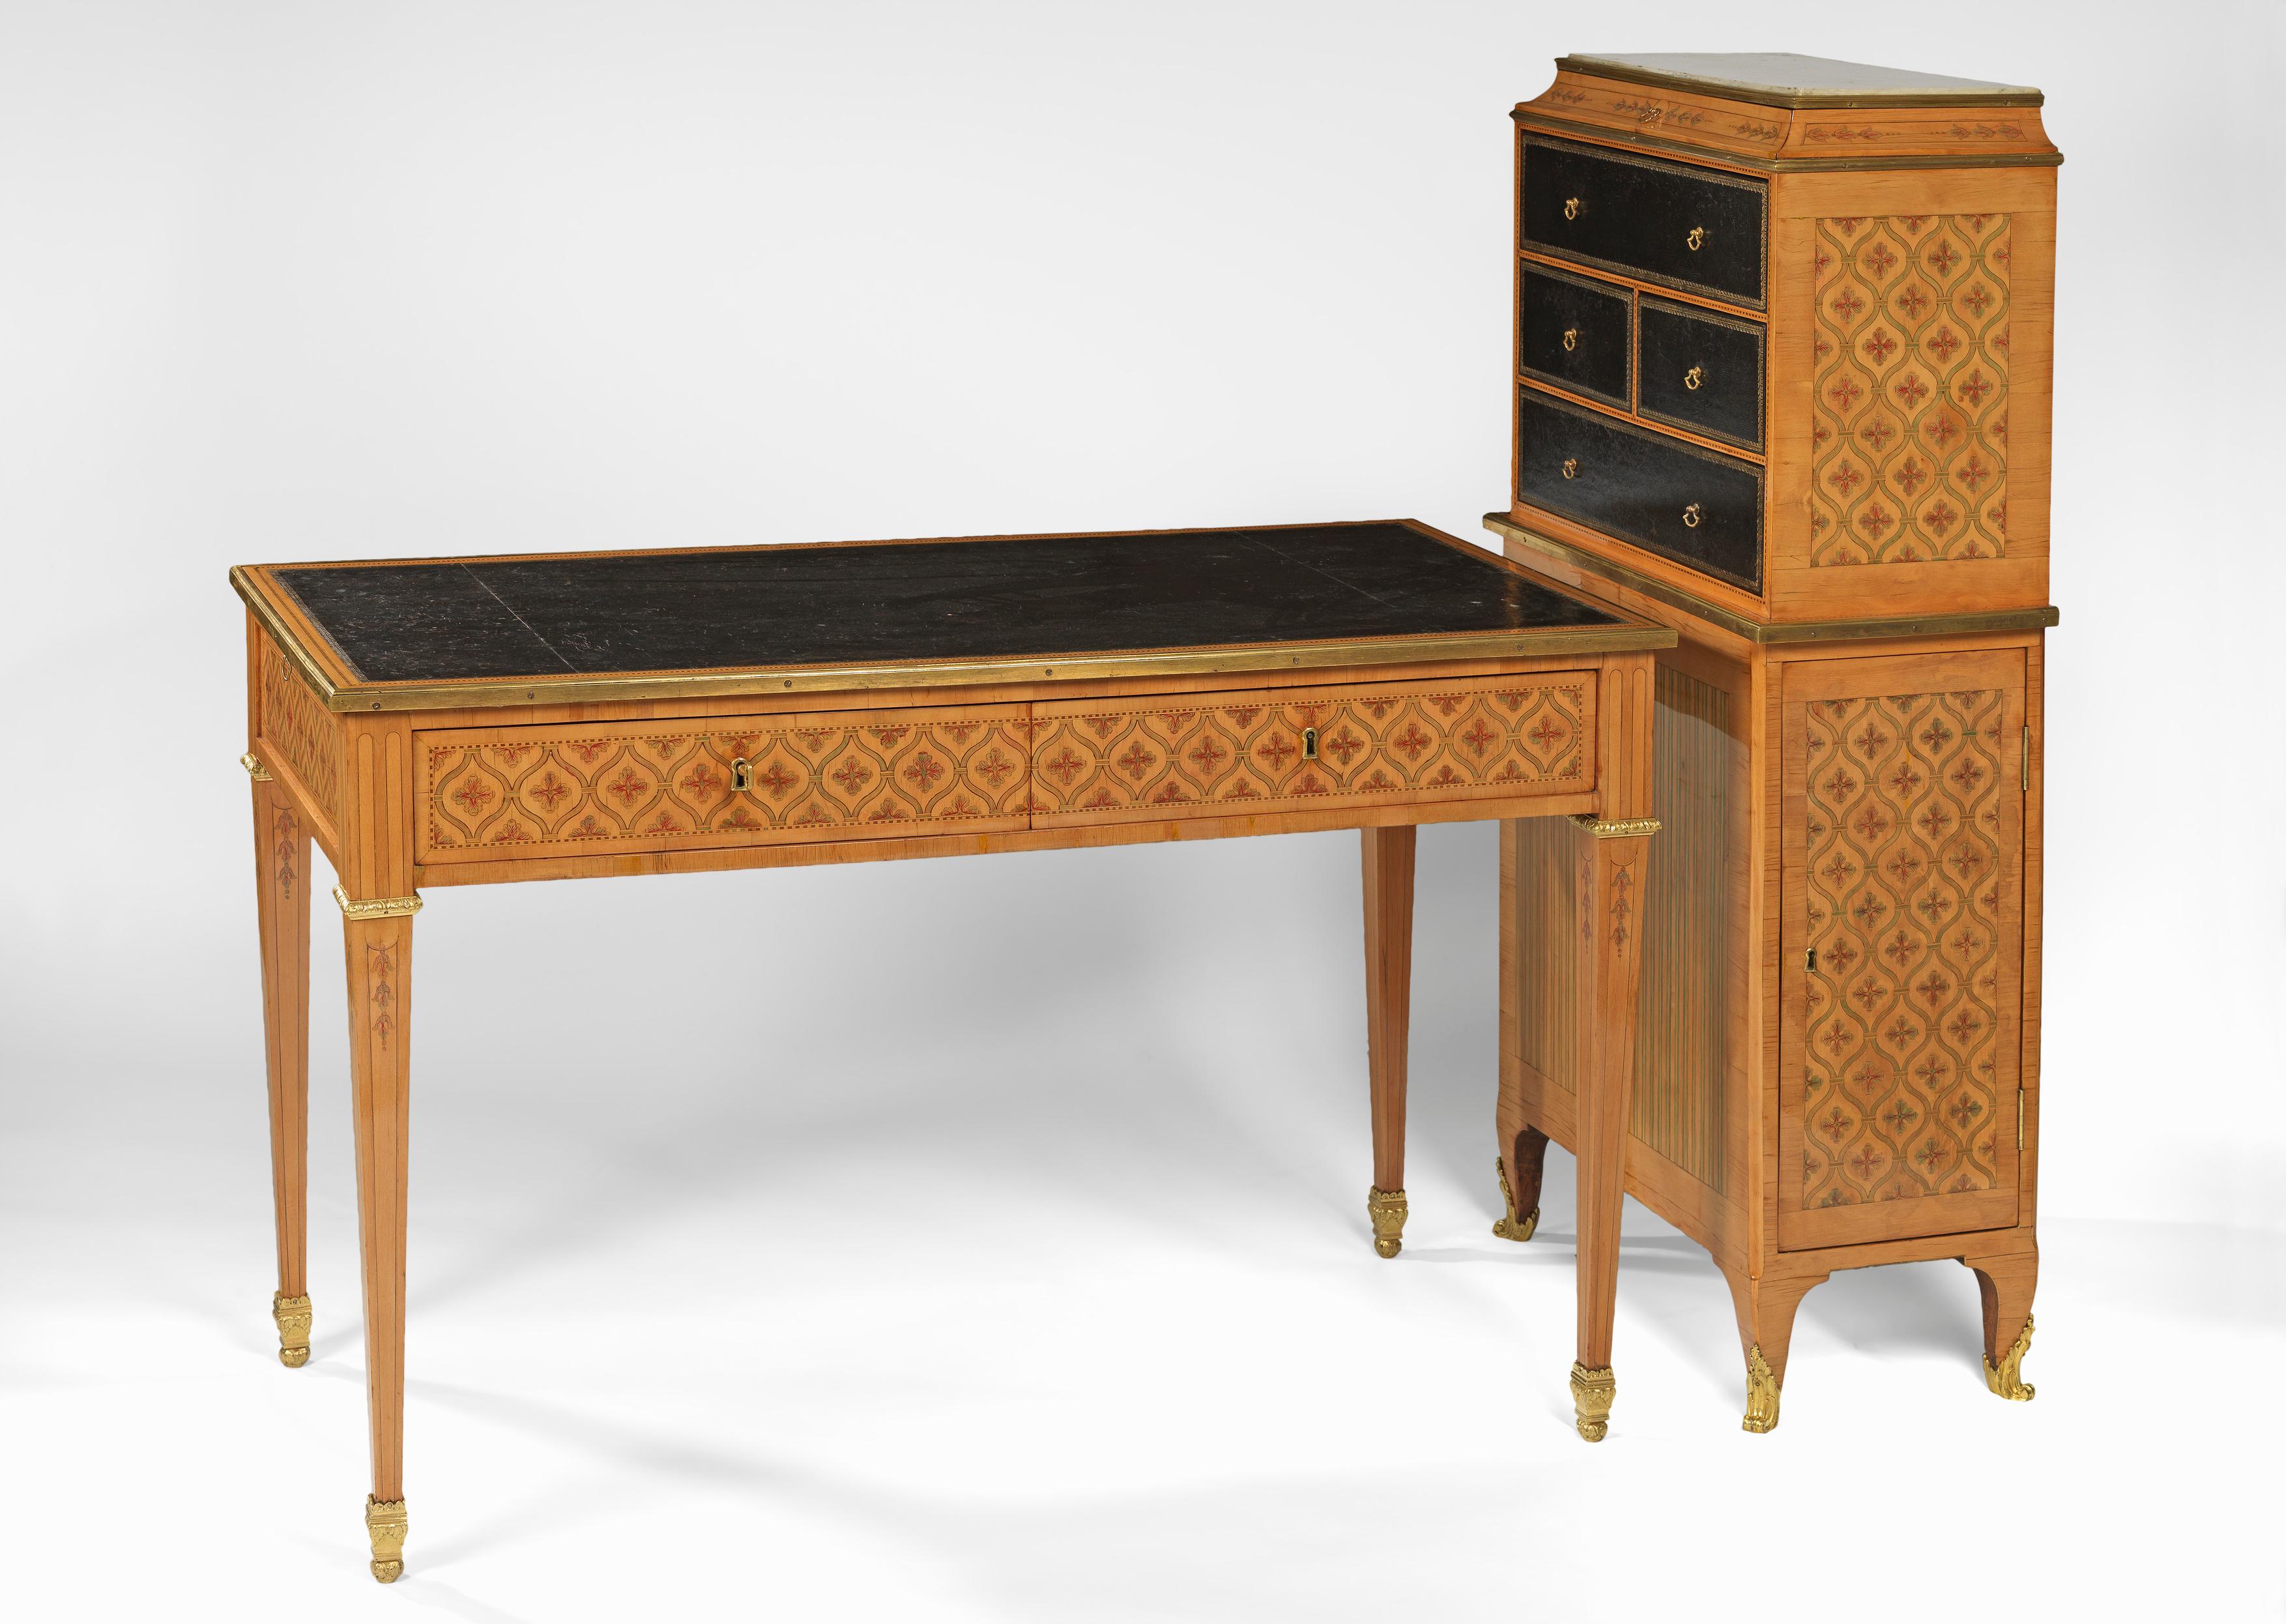 Veneered in rosewood and stained wood of hearts and diamonds intertwined, ornamentation ormolu; the bureau plat, having a rectangular top with a black Moroccan leather, the frieze having two drawers and two pull out sides also covering the same